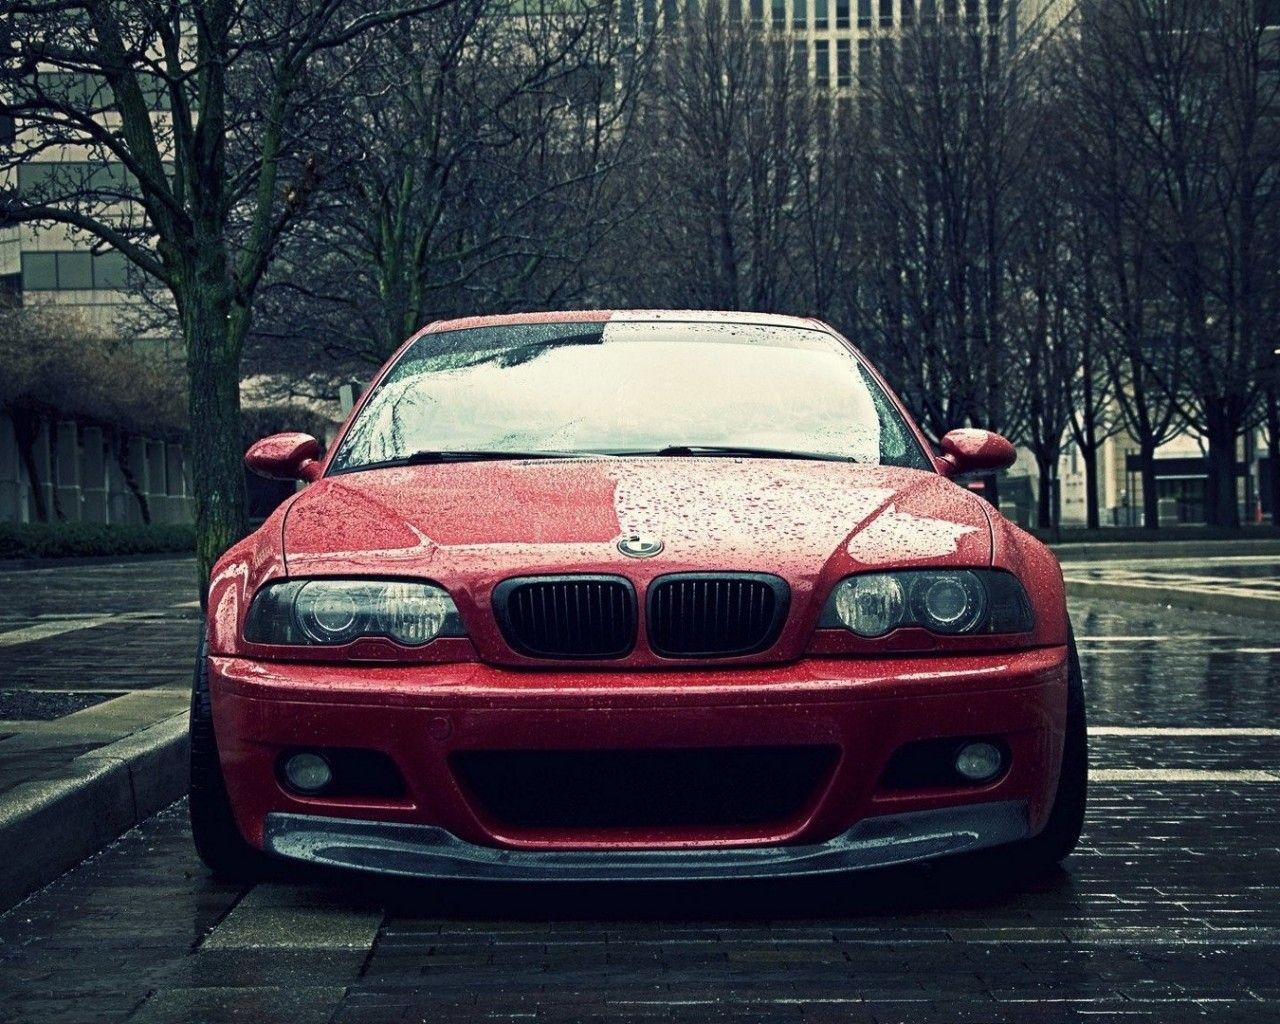 Download 1280x1024 Bmw E Red, Rain Drops, Front View, Cars